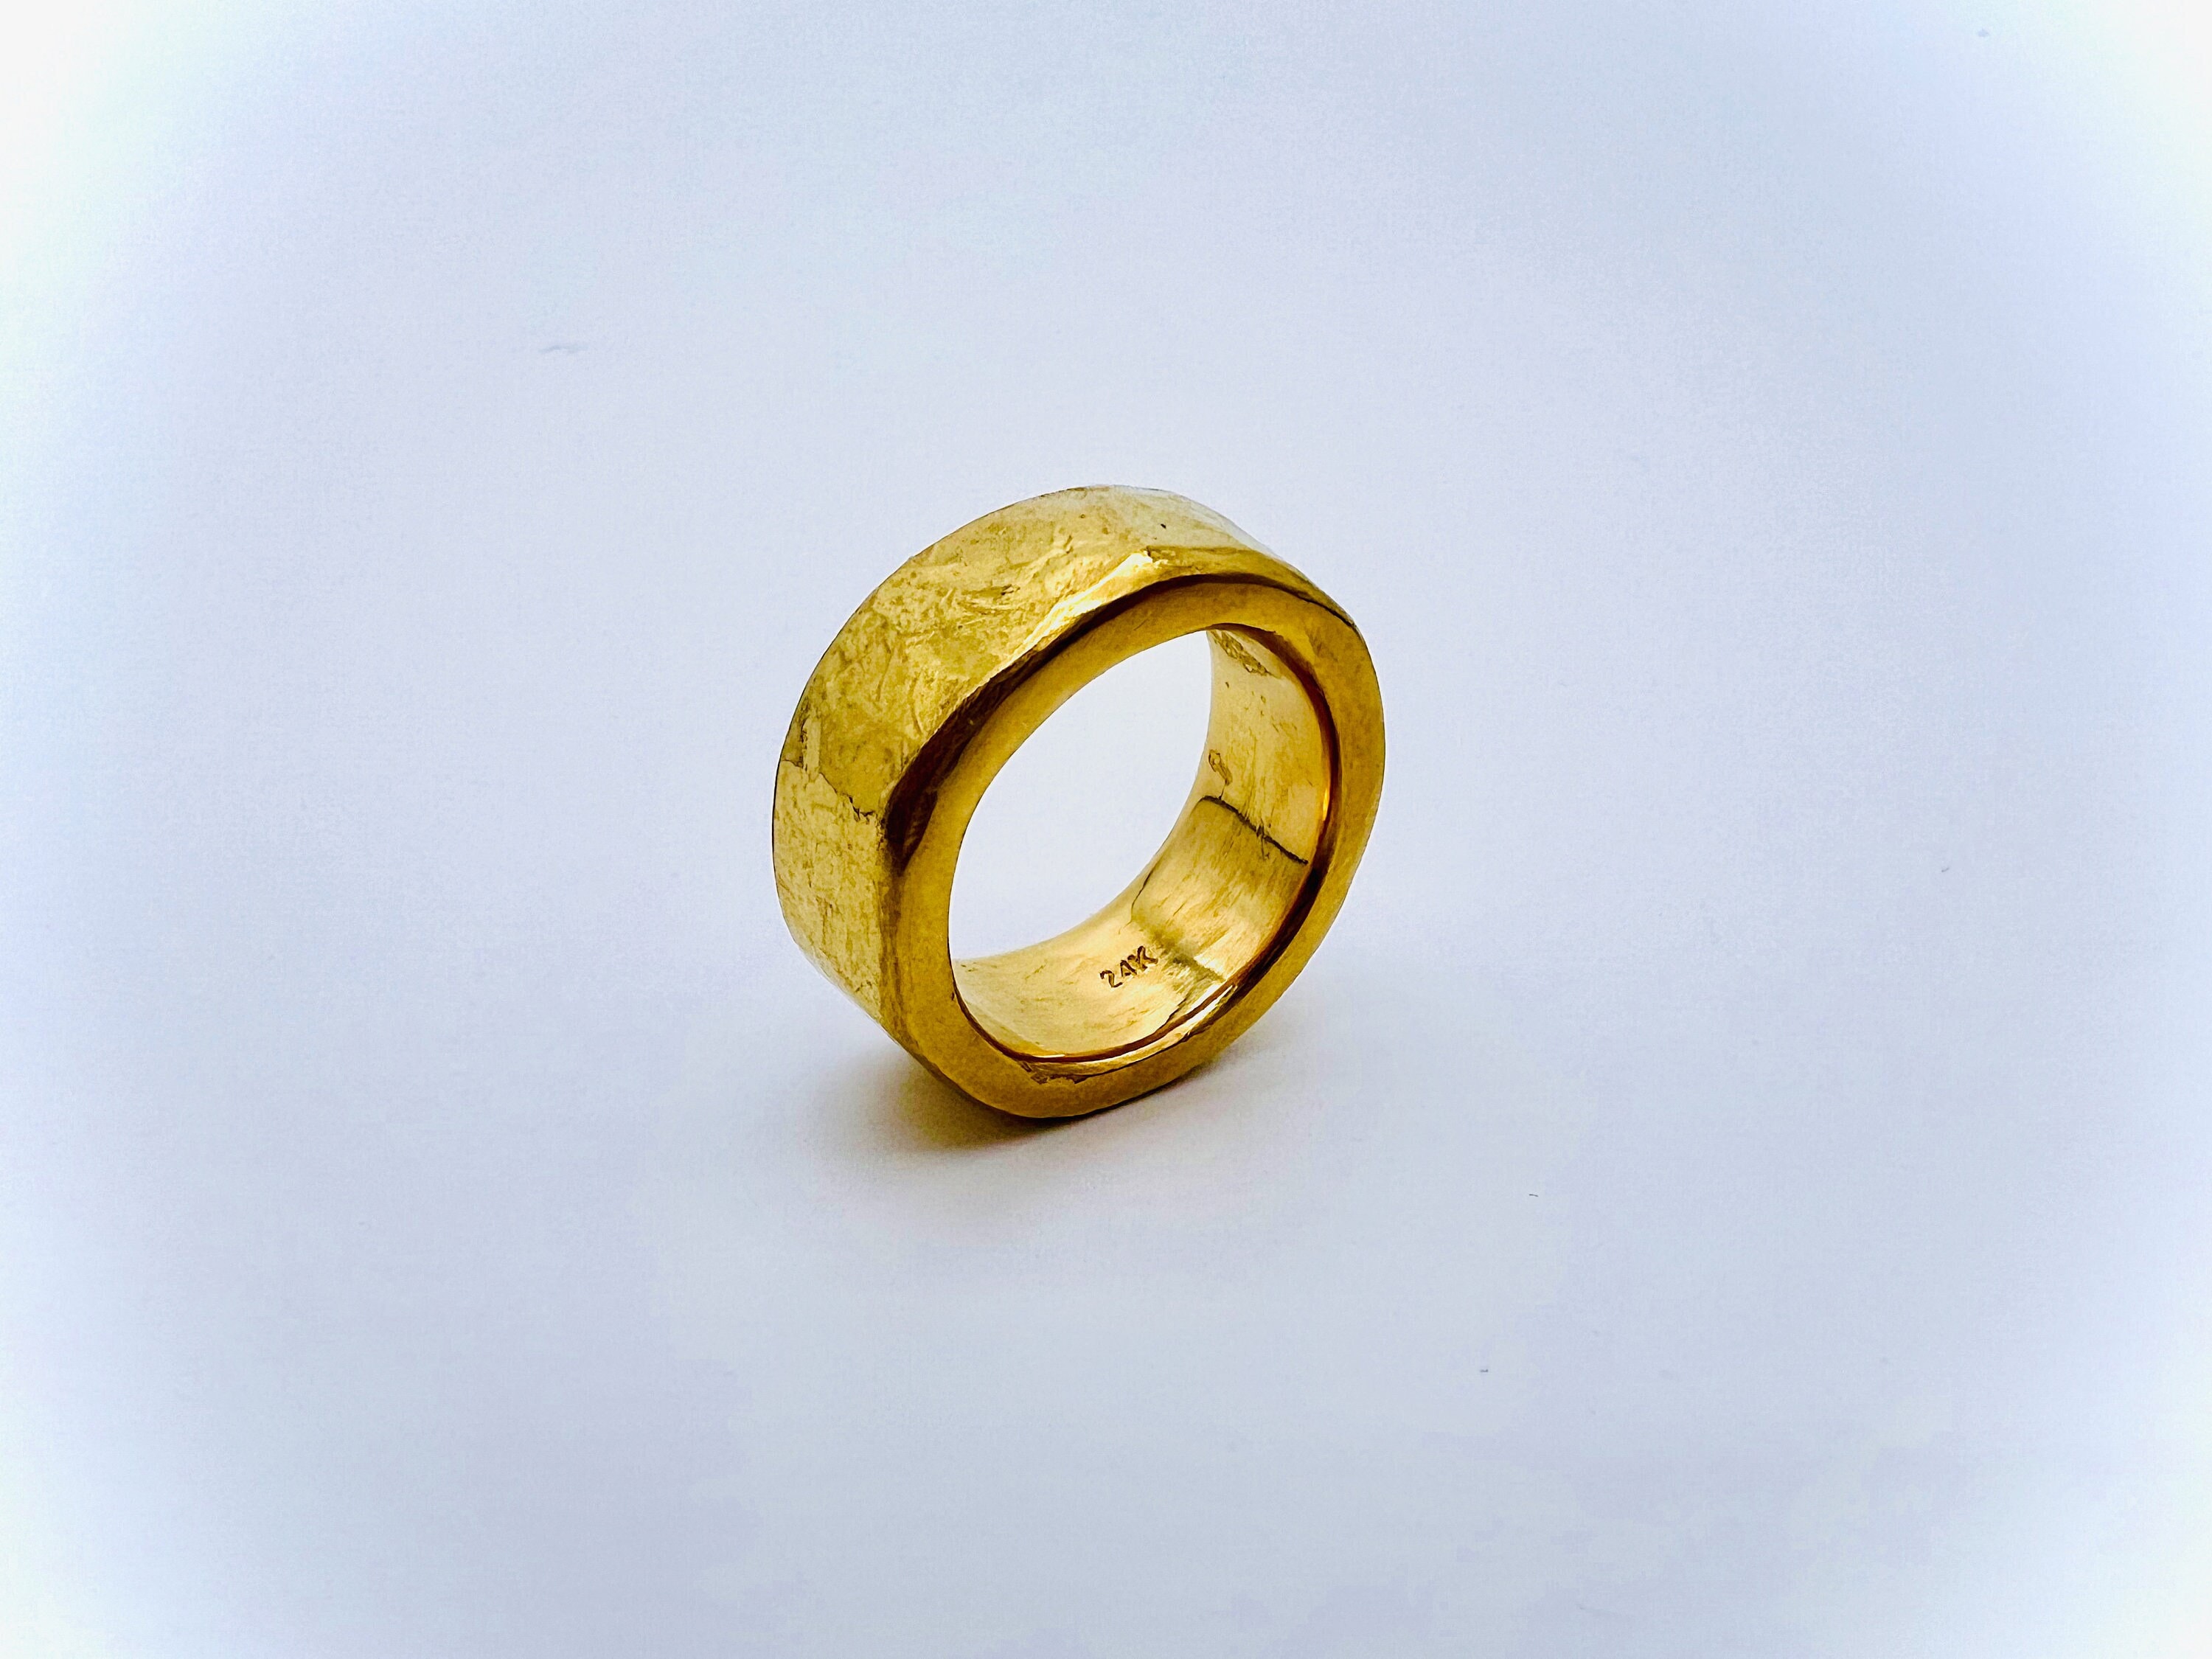 Buy 24 Carat Gold Rings at Best Prices Online at Tata CLiQ